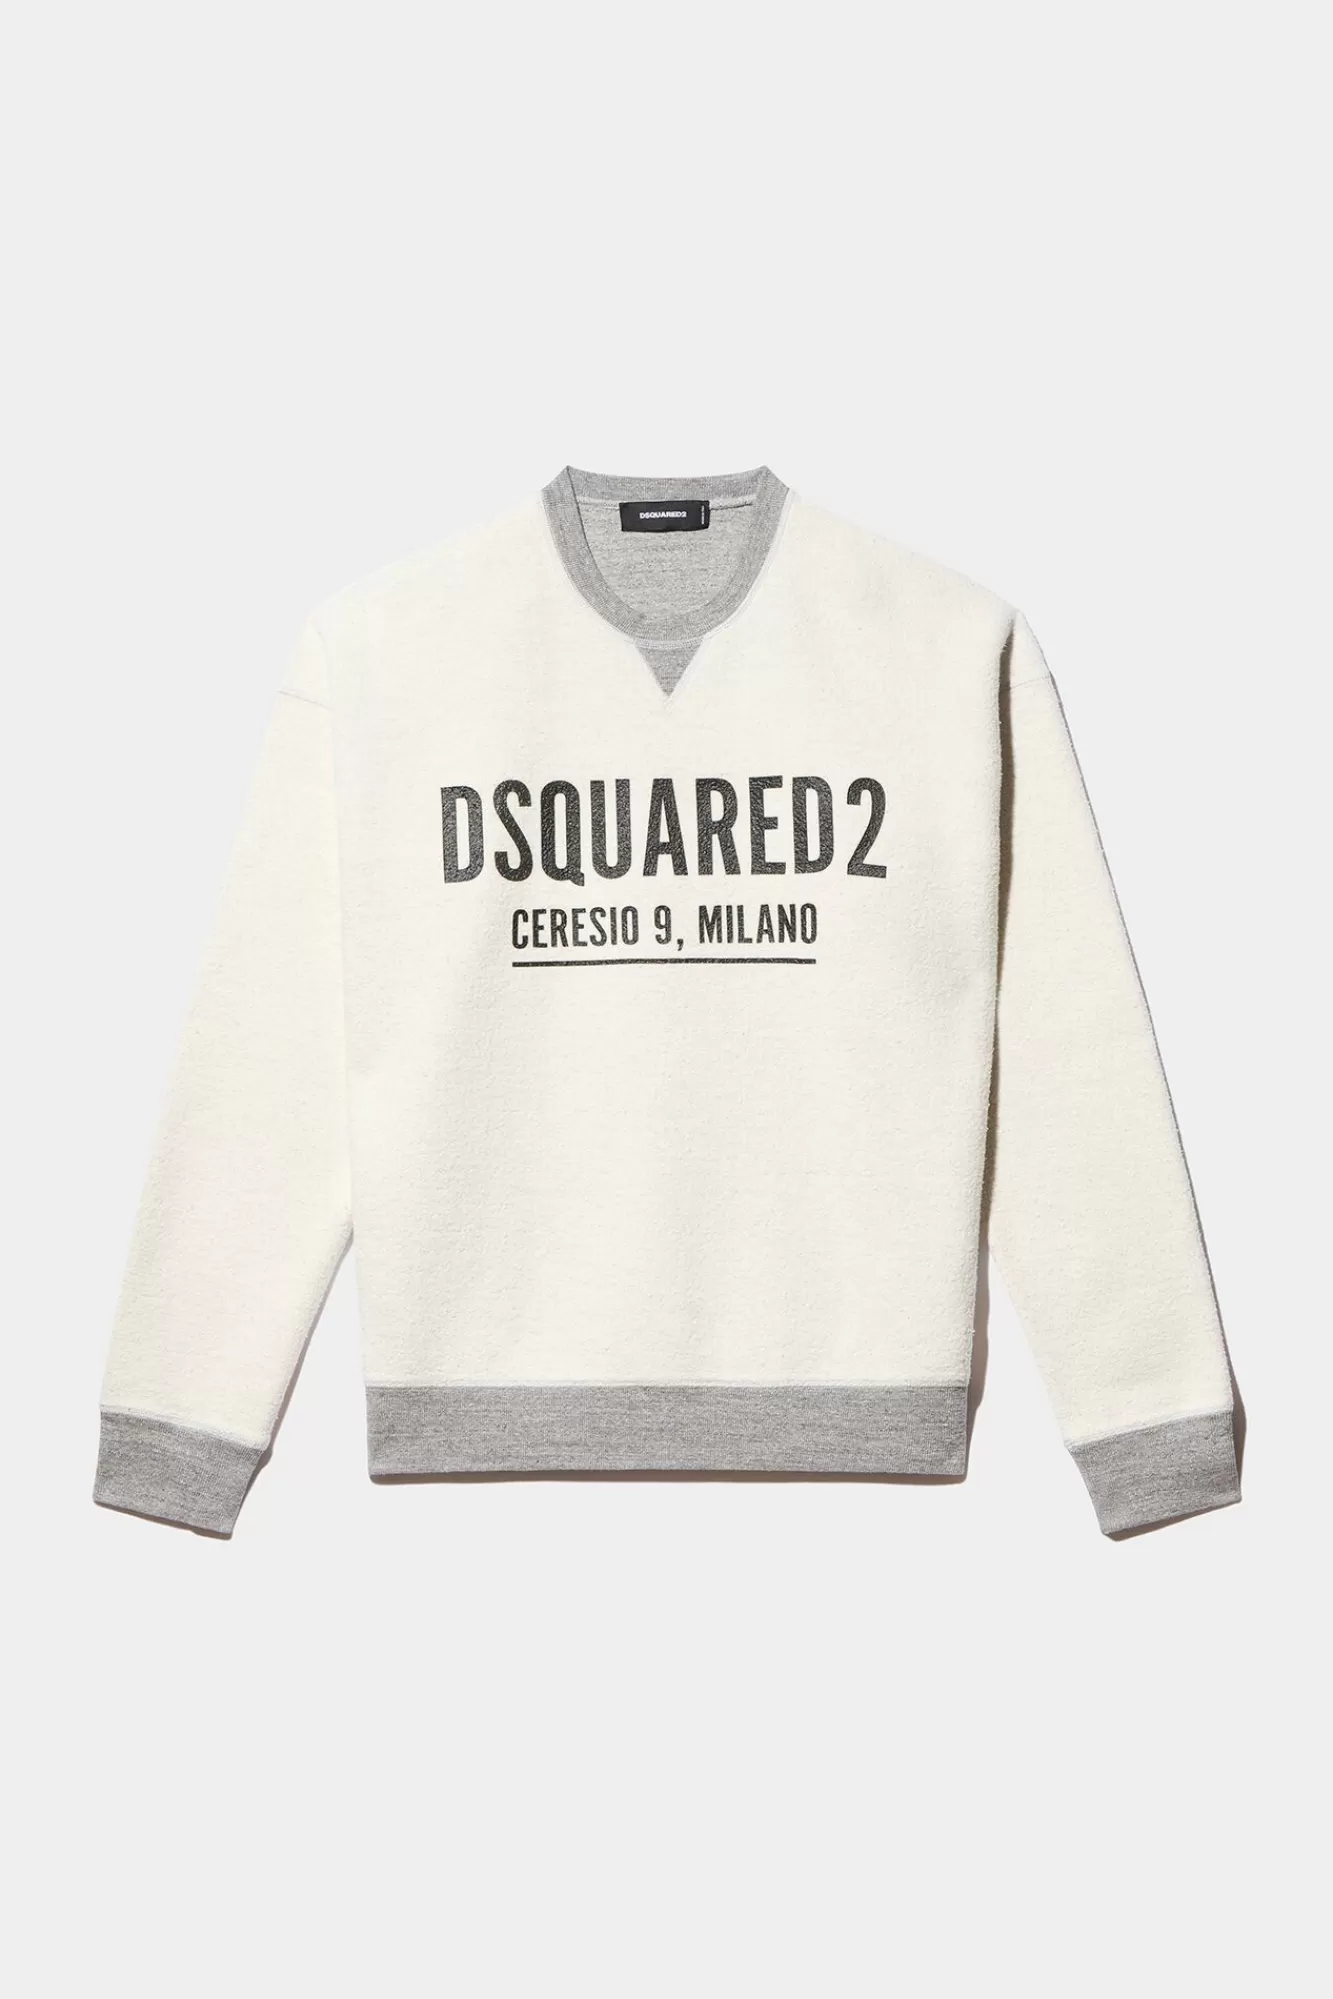 Ceresio 9 Mike Sweater<Dsquared2 Cheap